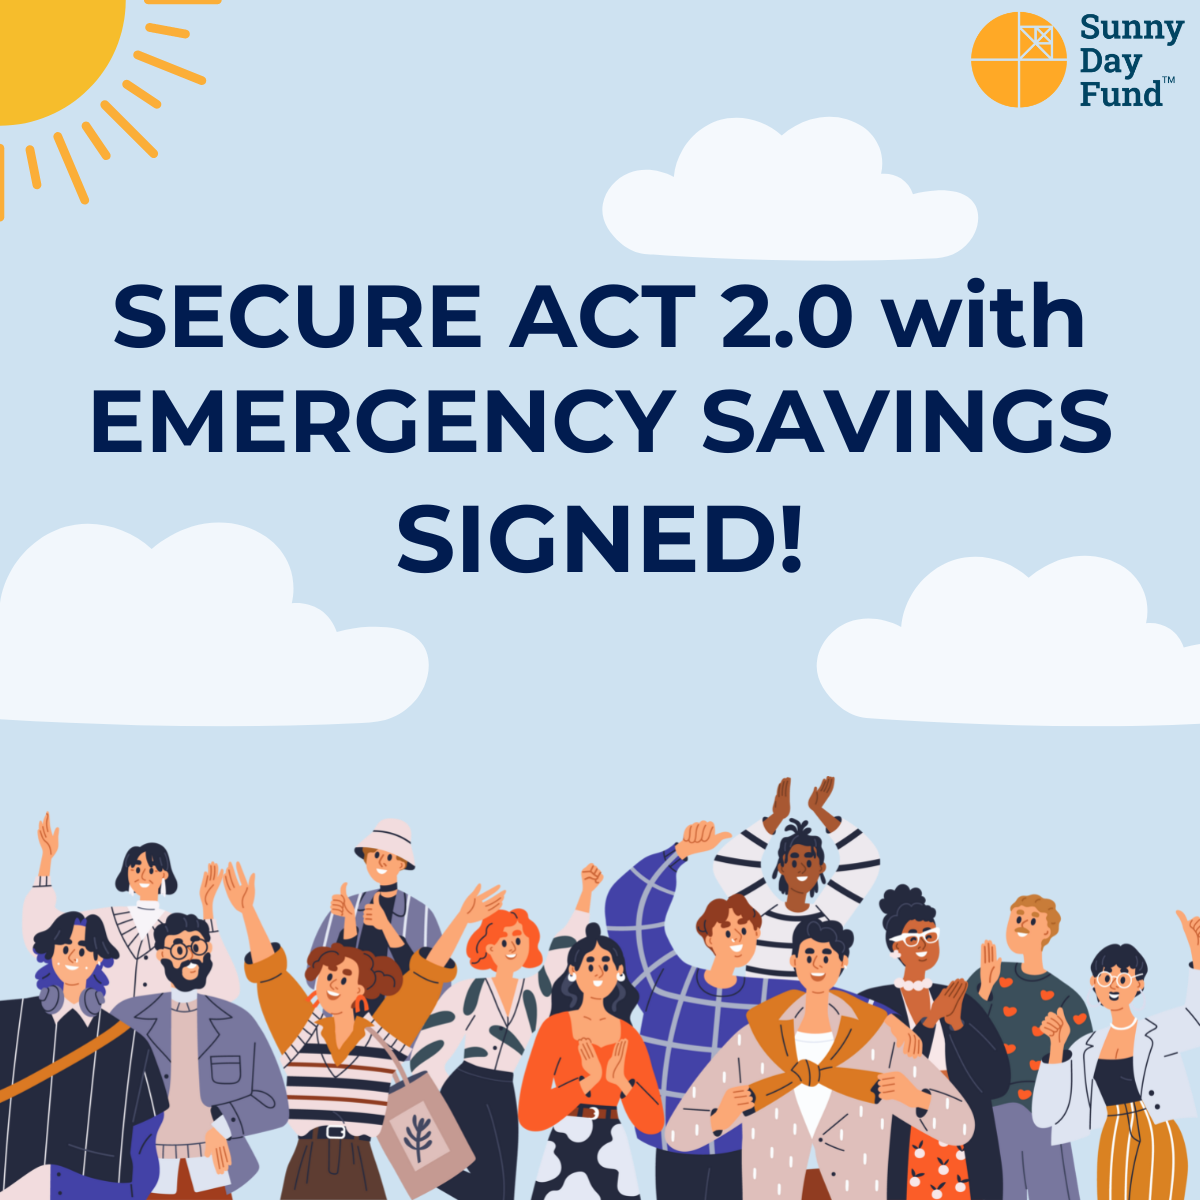 Secure Act 2.0 with emergency savings signed